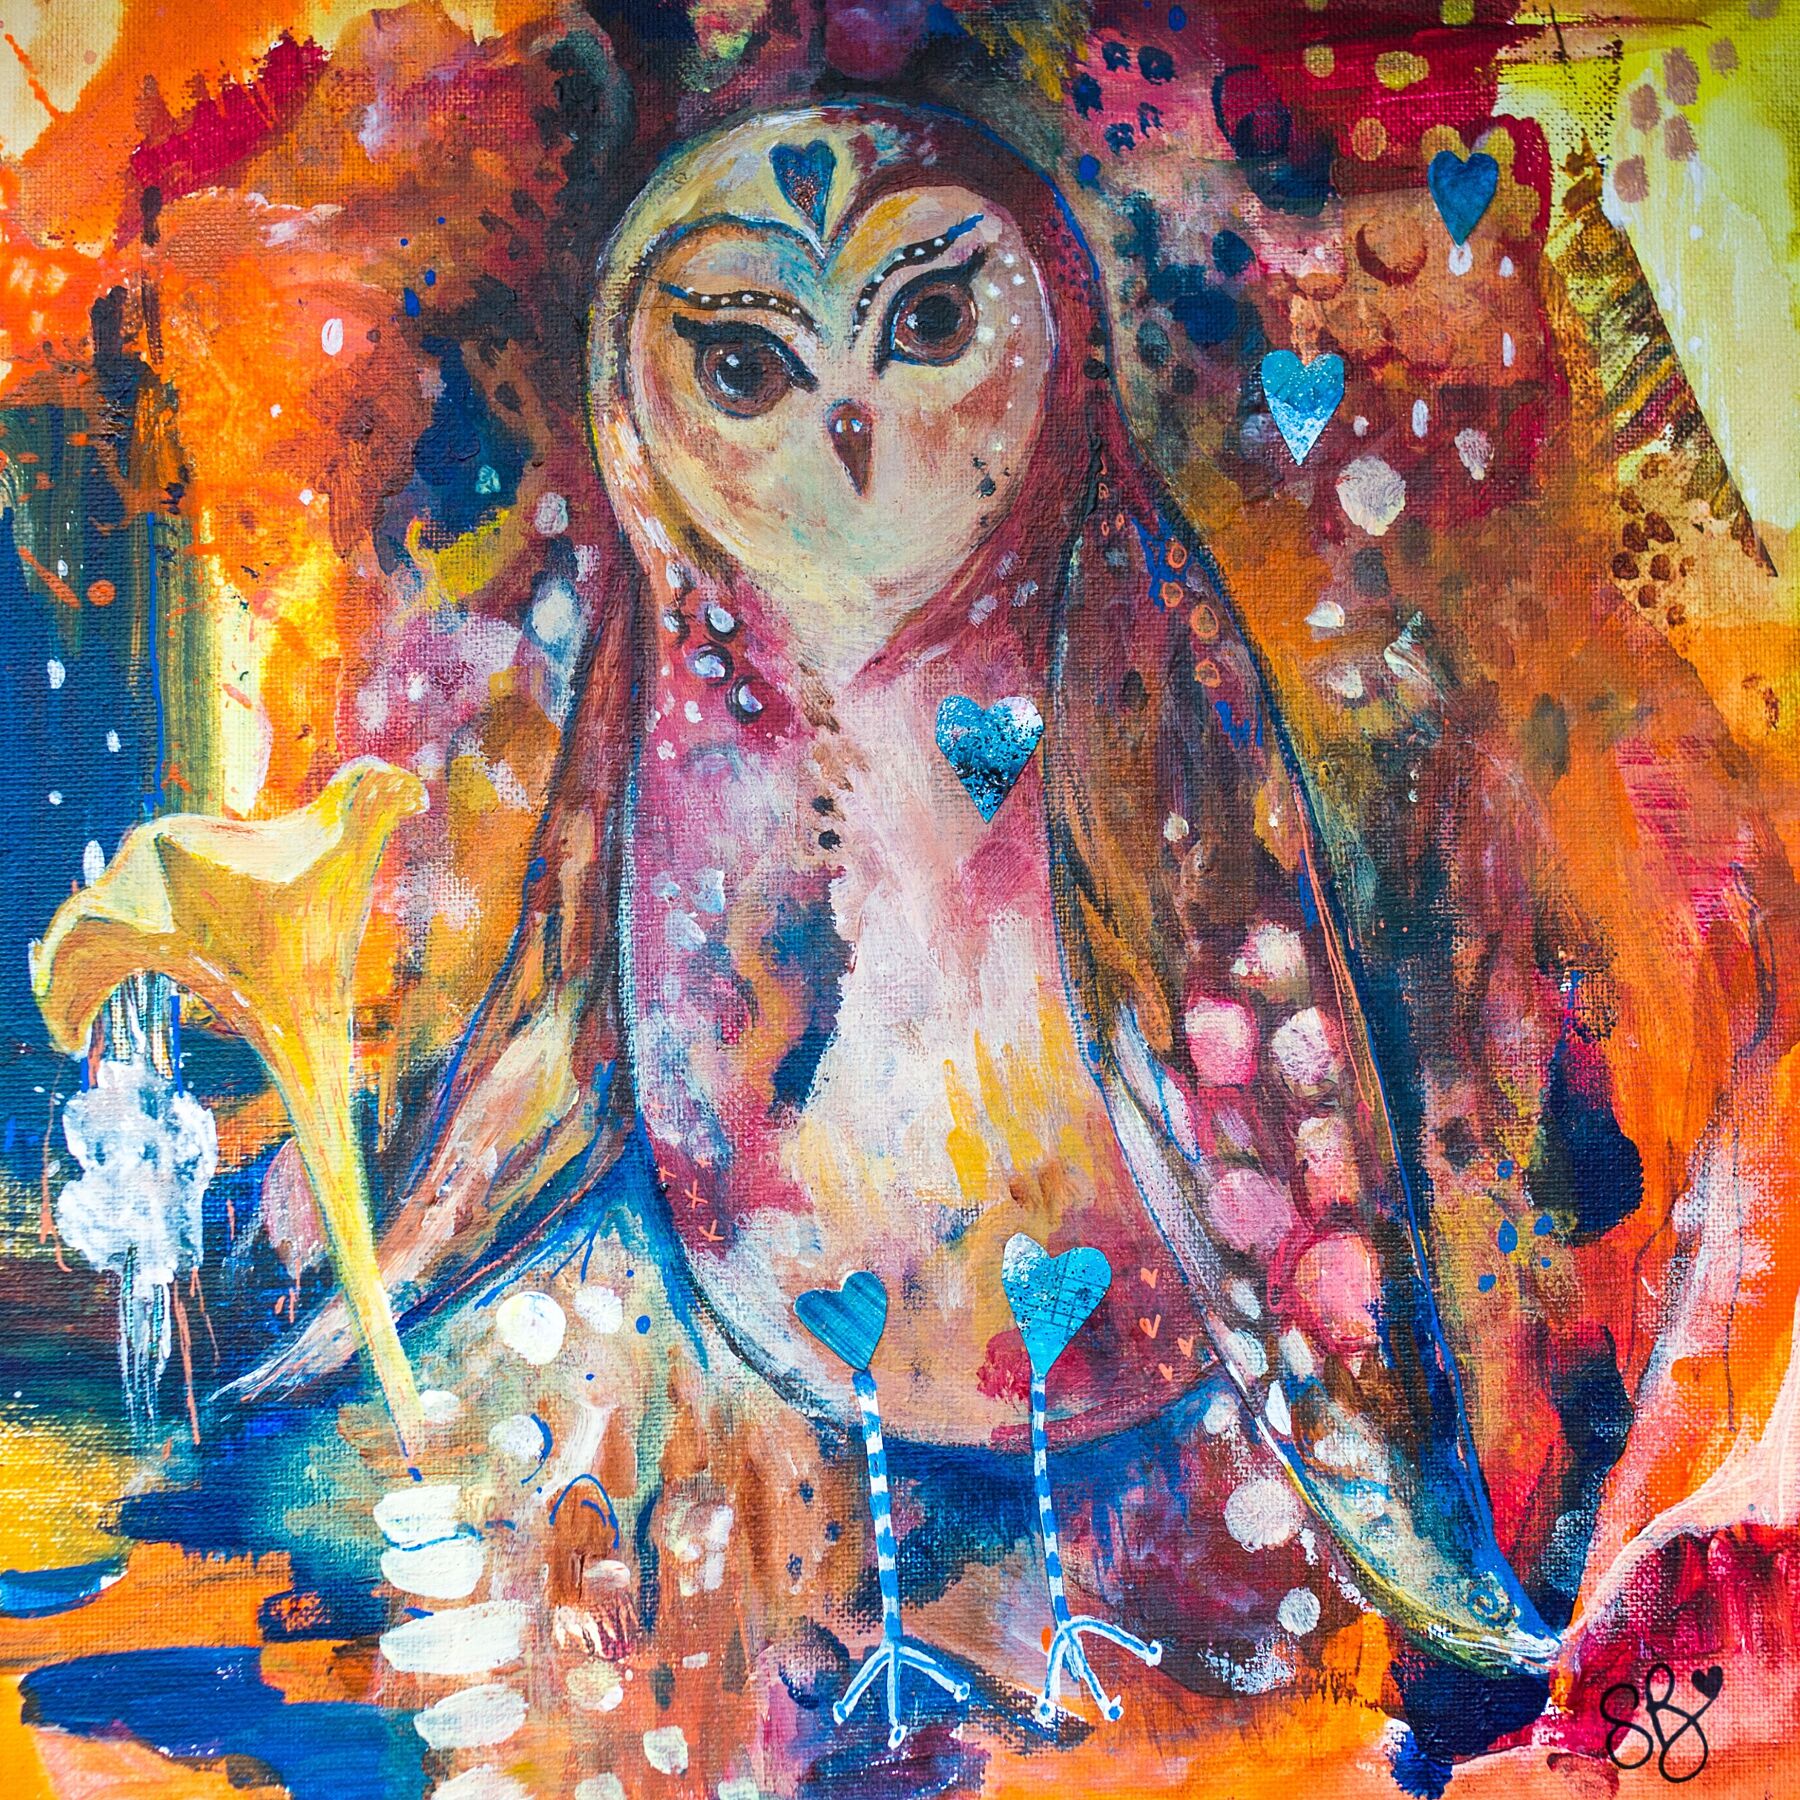 Special owl print- Earth Spirit Owl is whimsical and adorable owl painted in earthy autumnal tones of brown, deep red, orange and yellow ochre and dark blue. She holds a chanterelle mushroom in her wing.